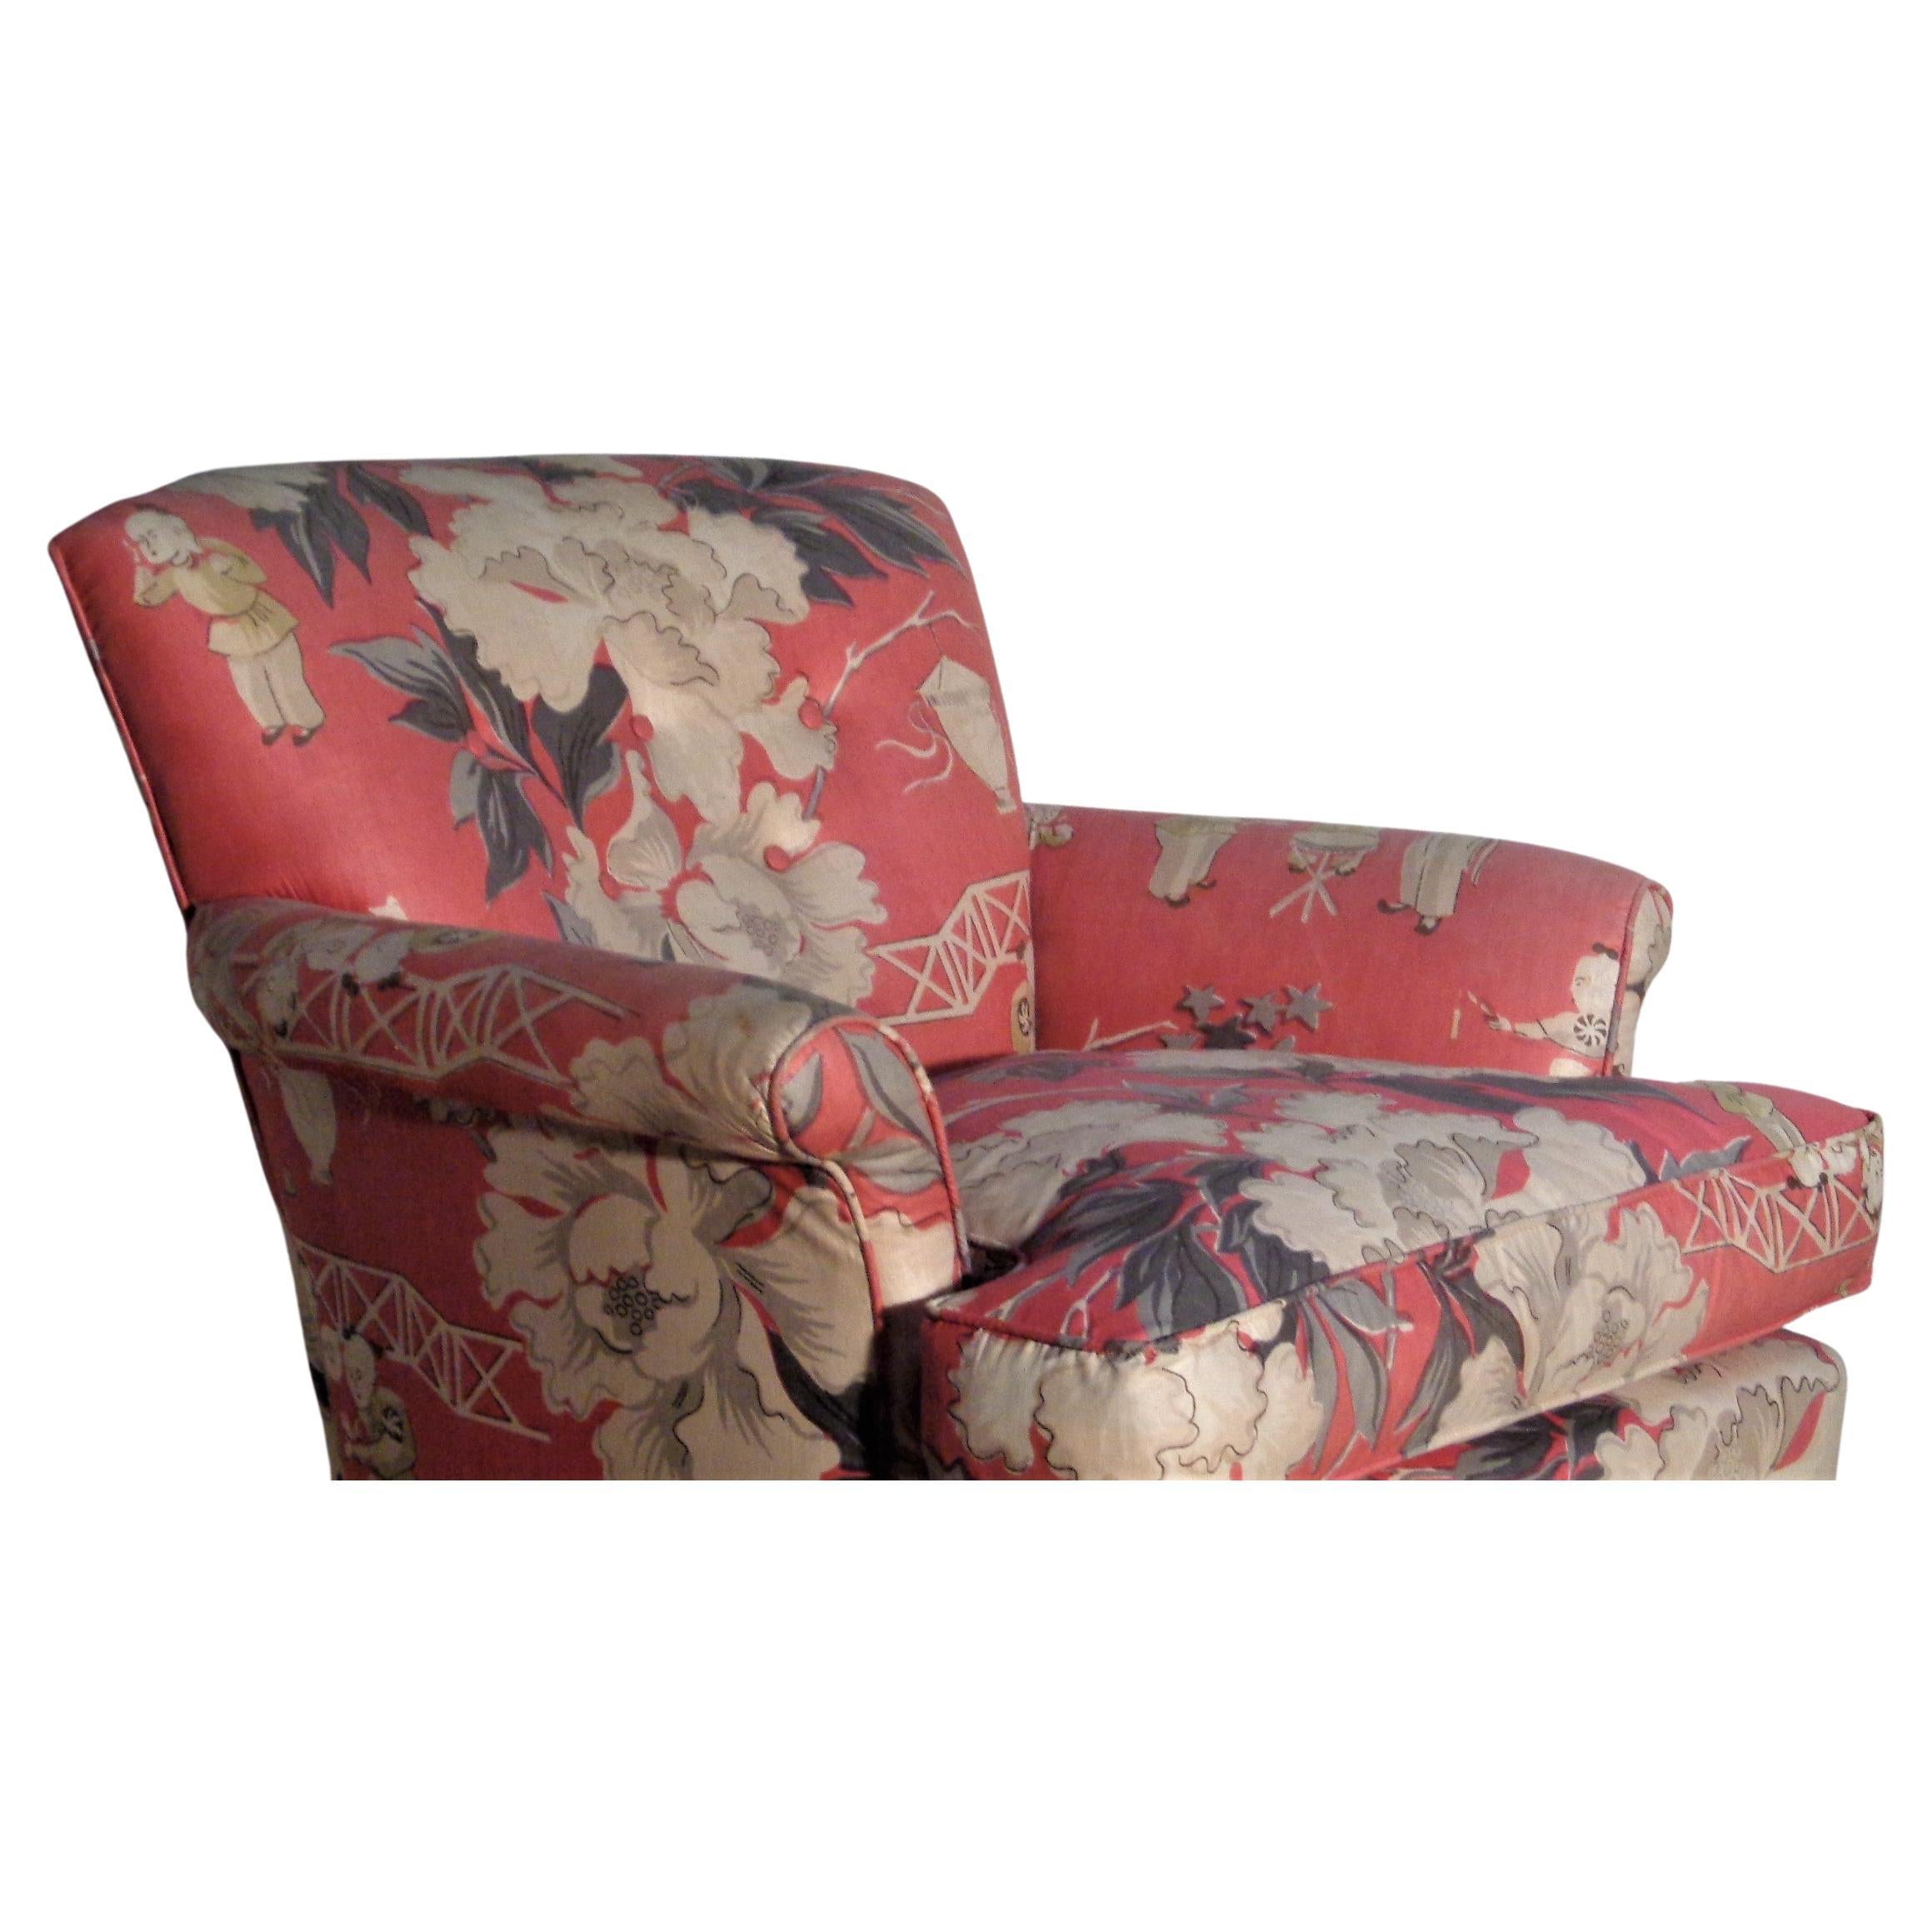  Dorothy Draper Style Original Chinoiserie Upholstered Lounge Chair, 1940's For Sale 3